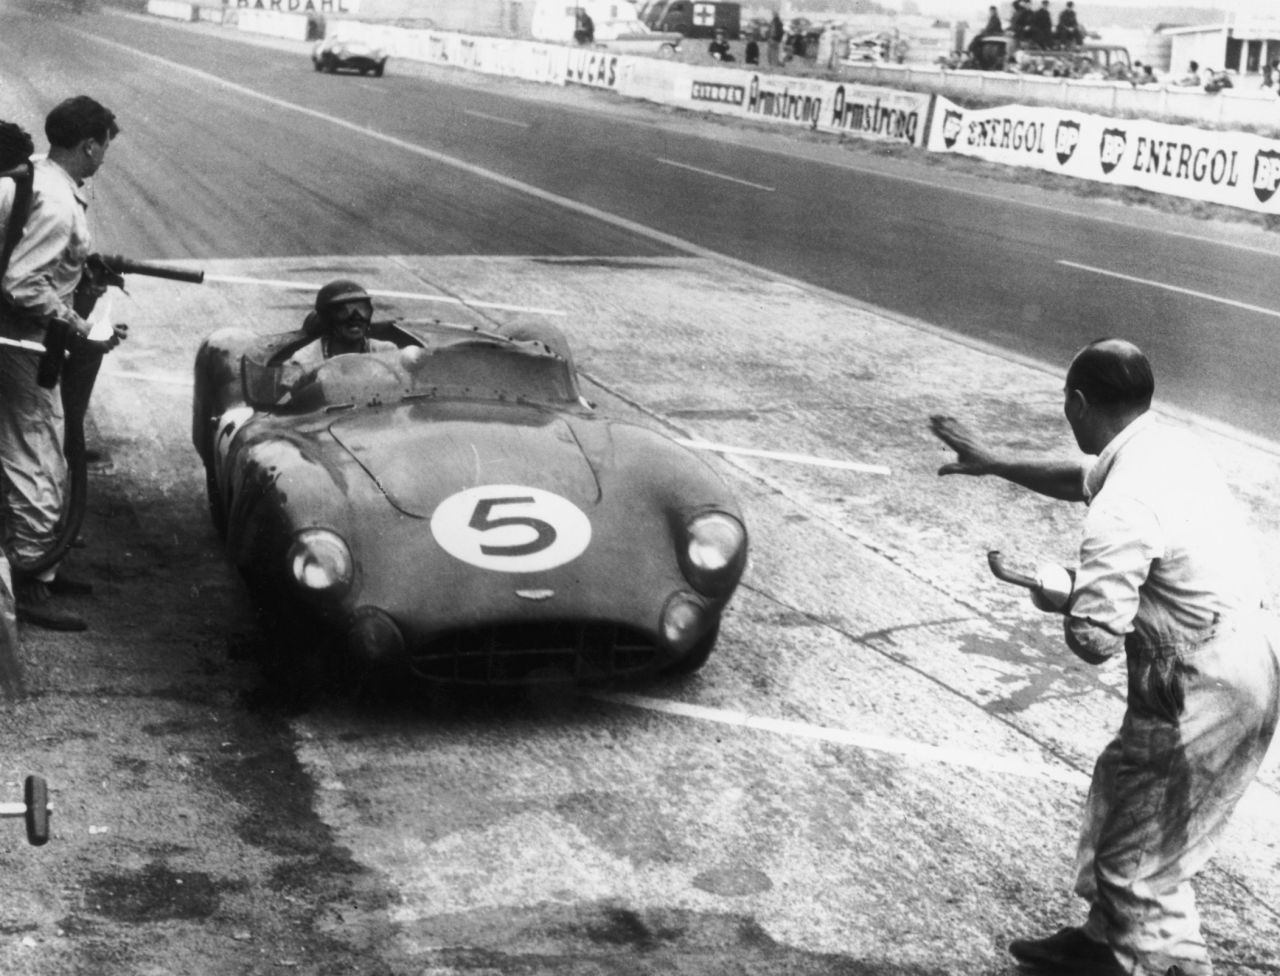 Shelby at Le Mans in an Aston Martin, 1959.